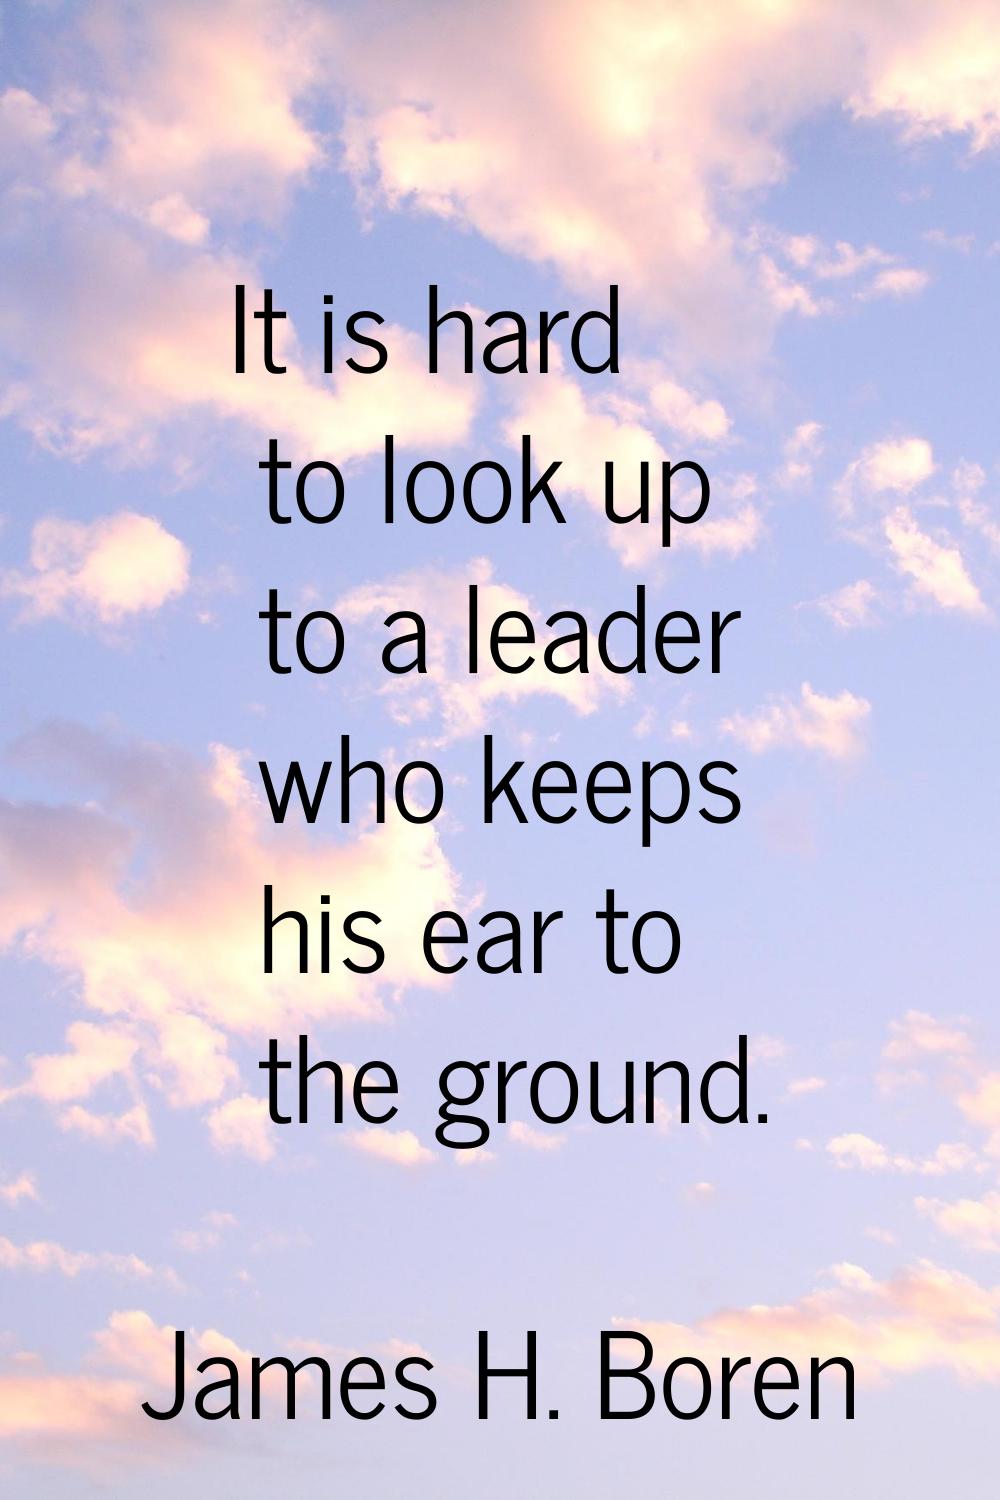 It is hard to look up to a leader who keeps his ear to the ground.